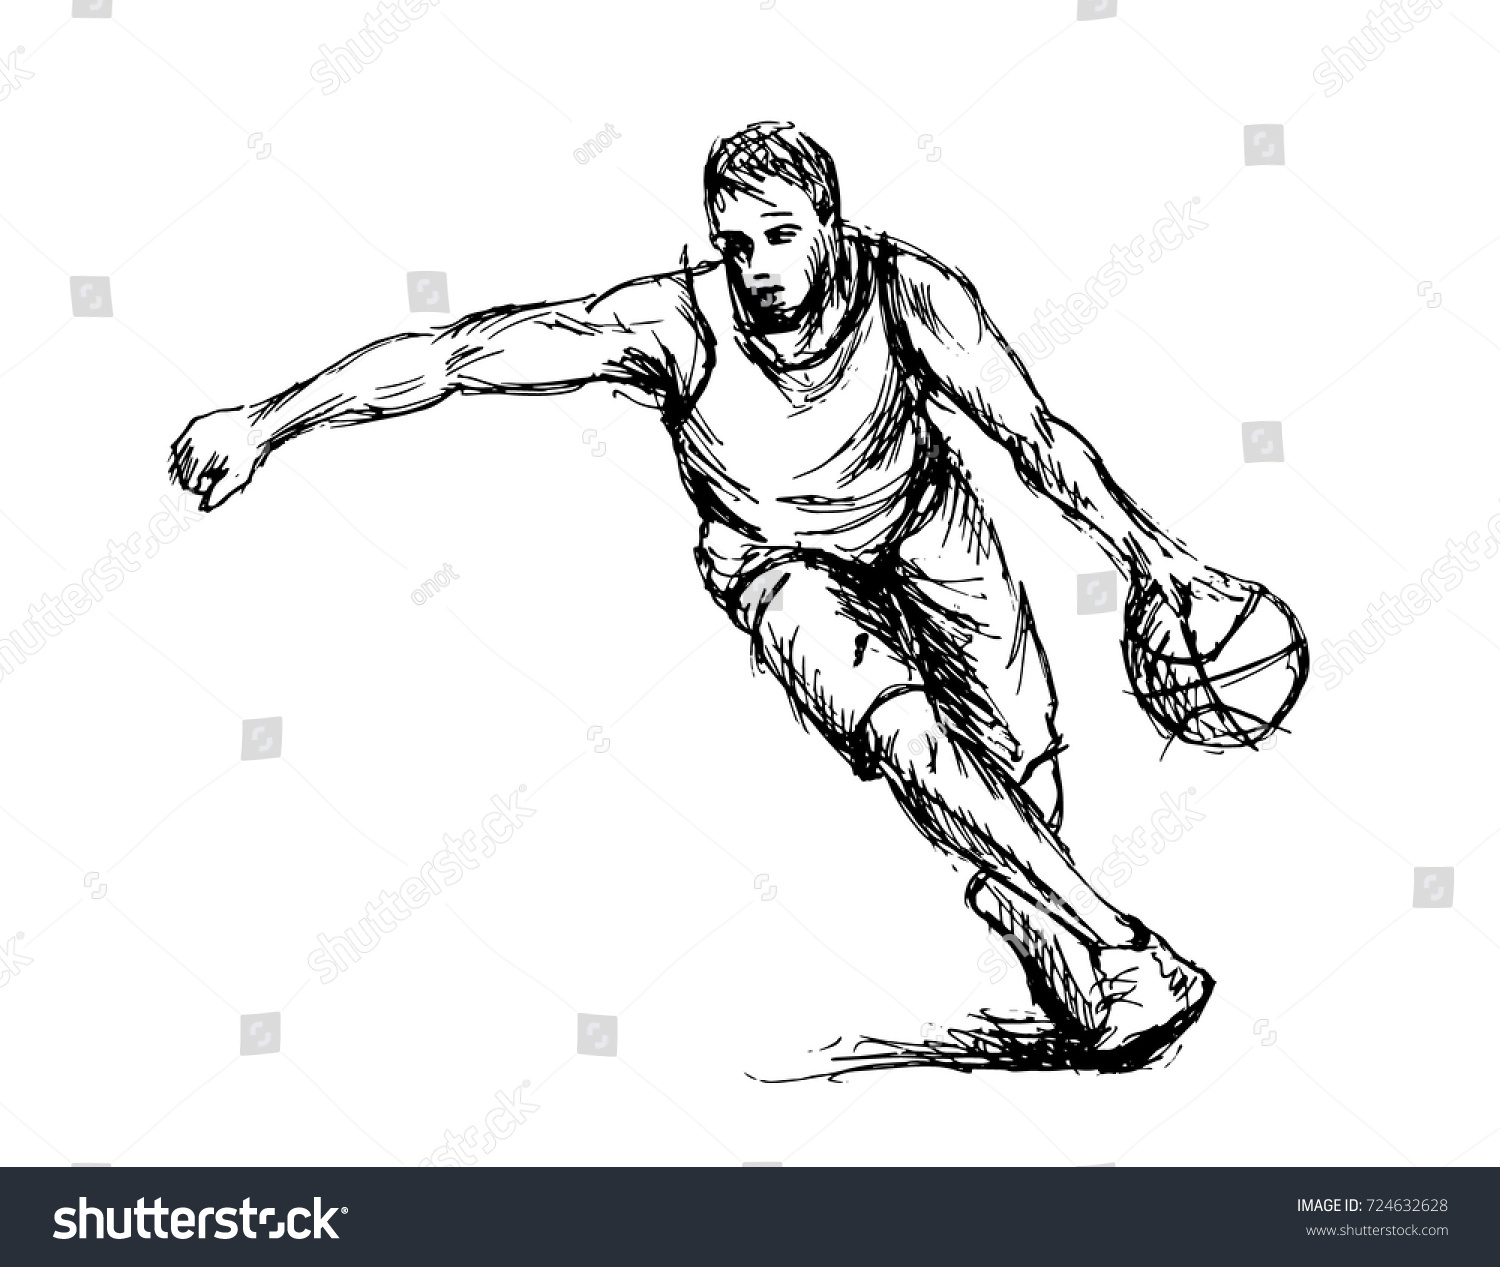 2,627 Basketball player sketch Images, Stock Photos & Vectors ...